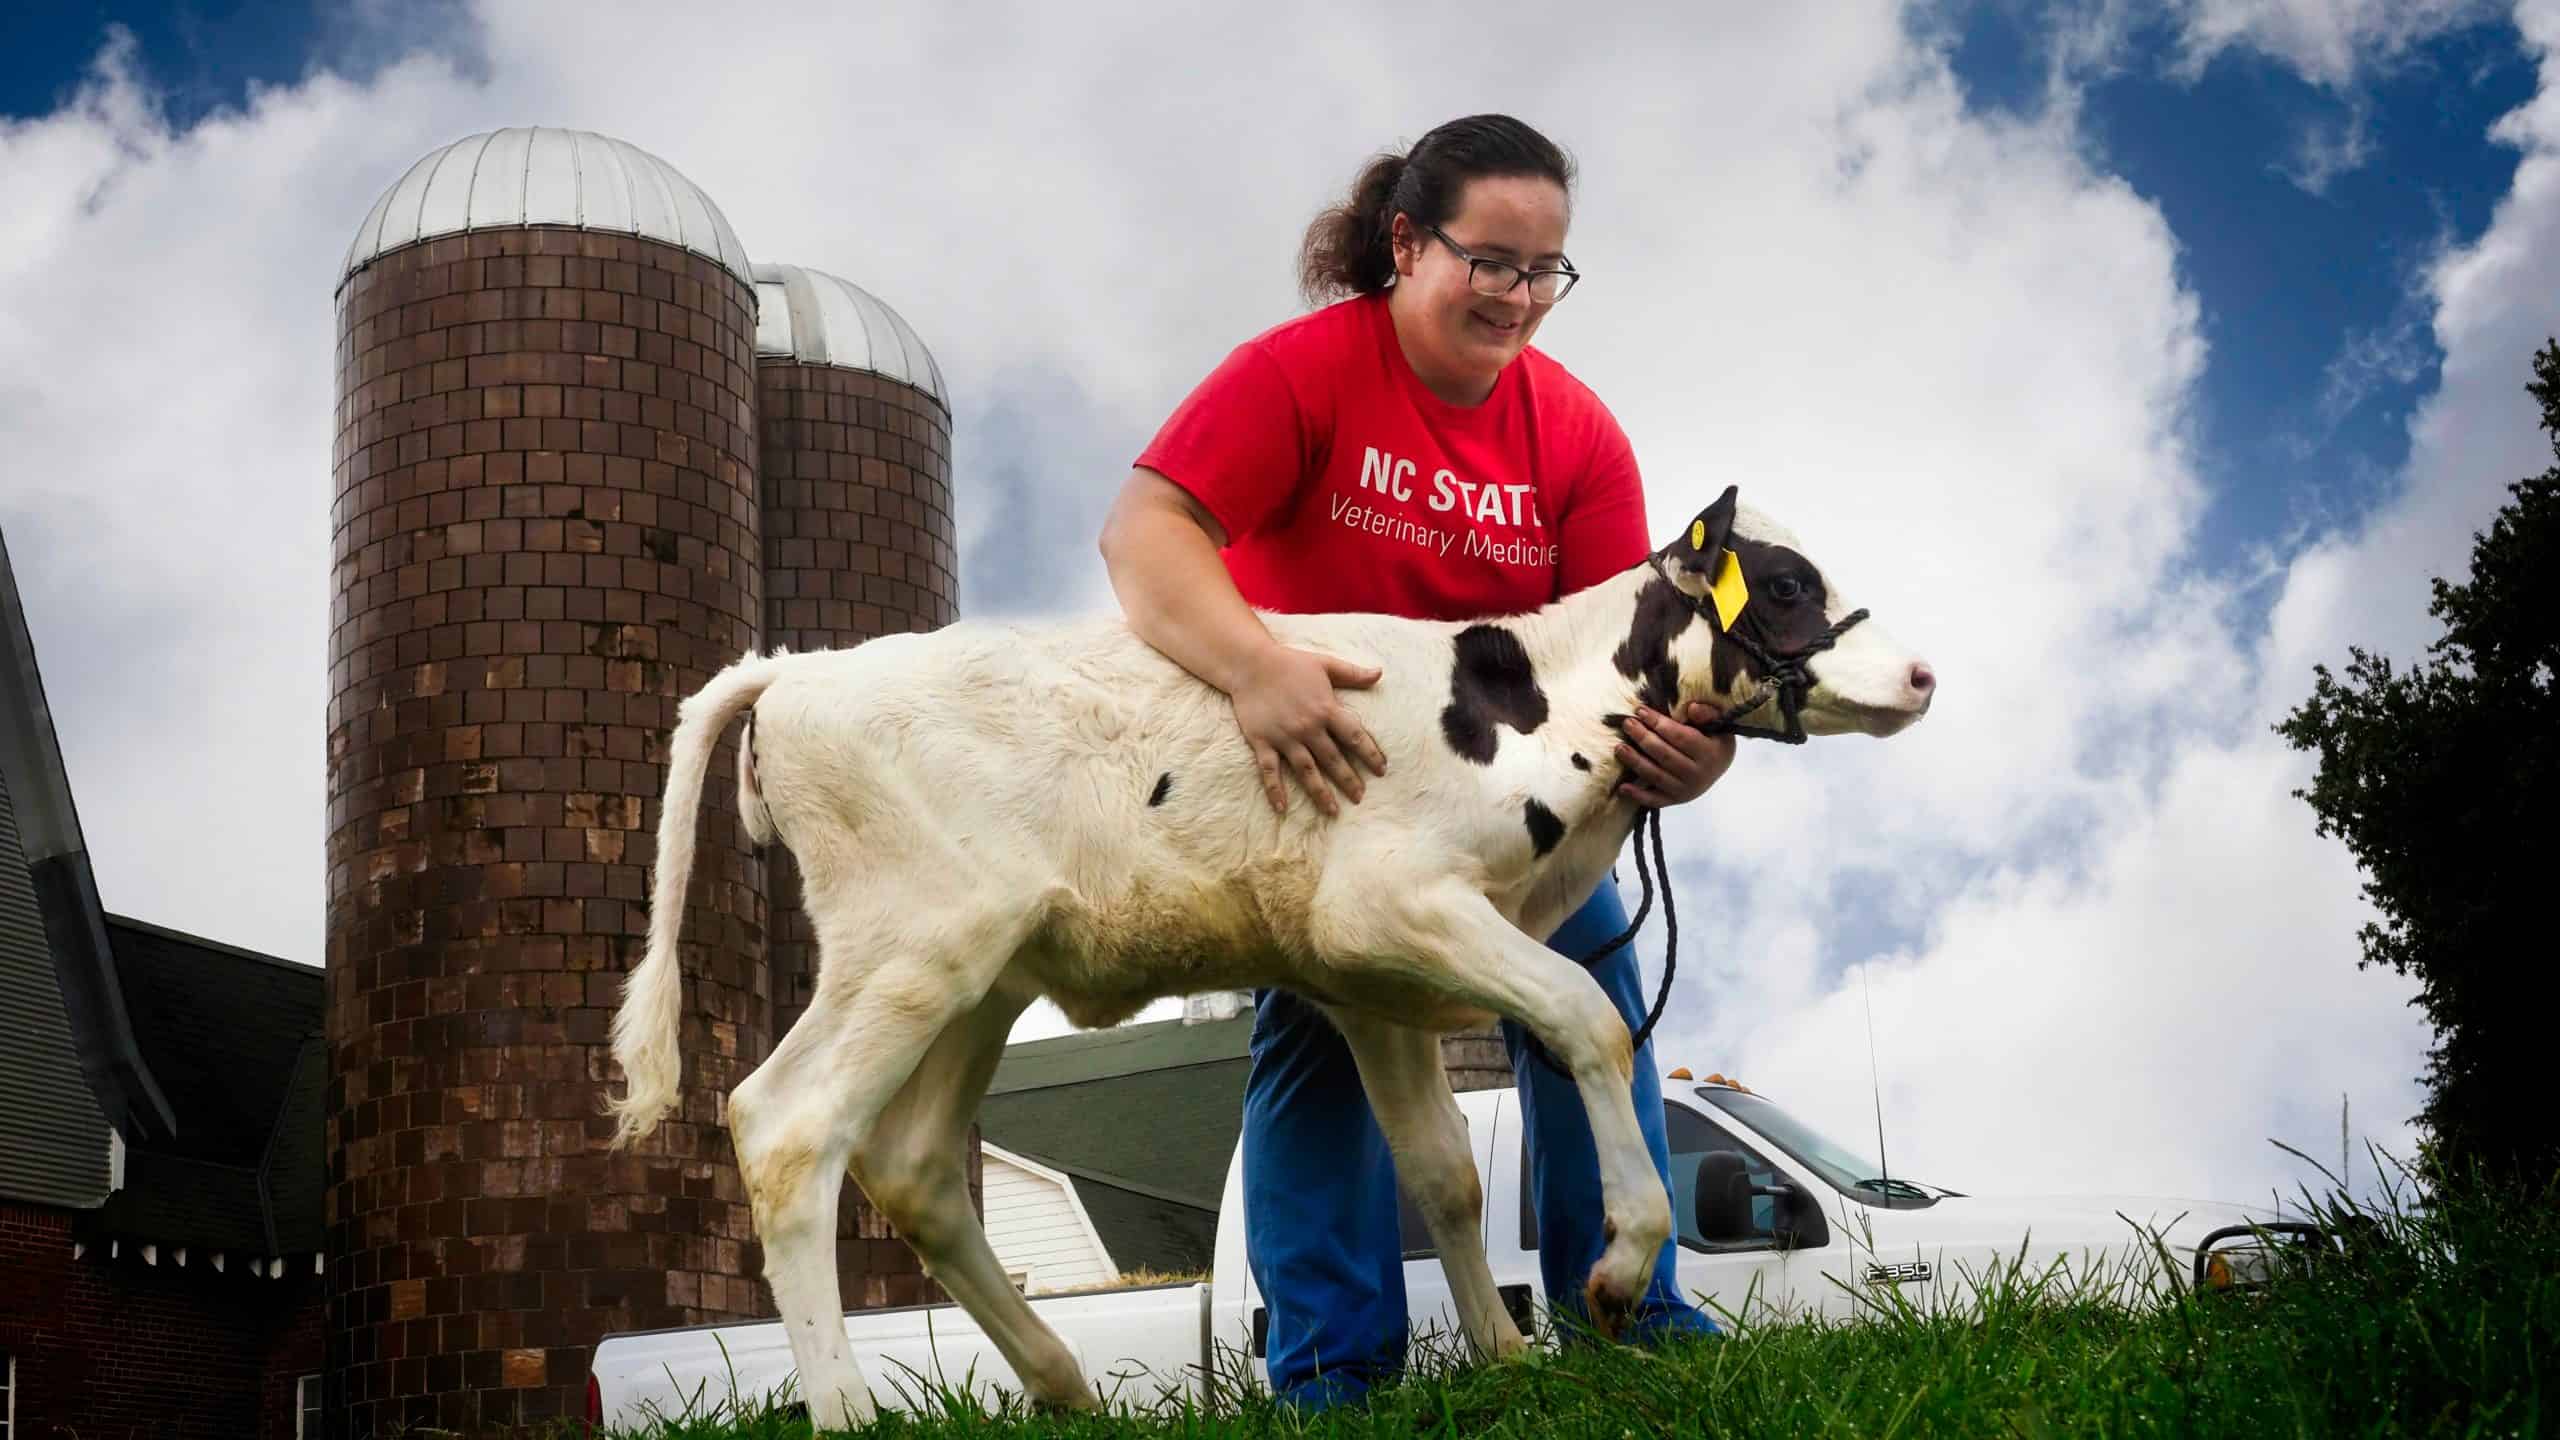 A veterinary medicine student stands with a one-month-old calf.